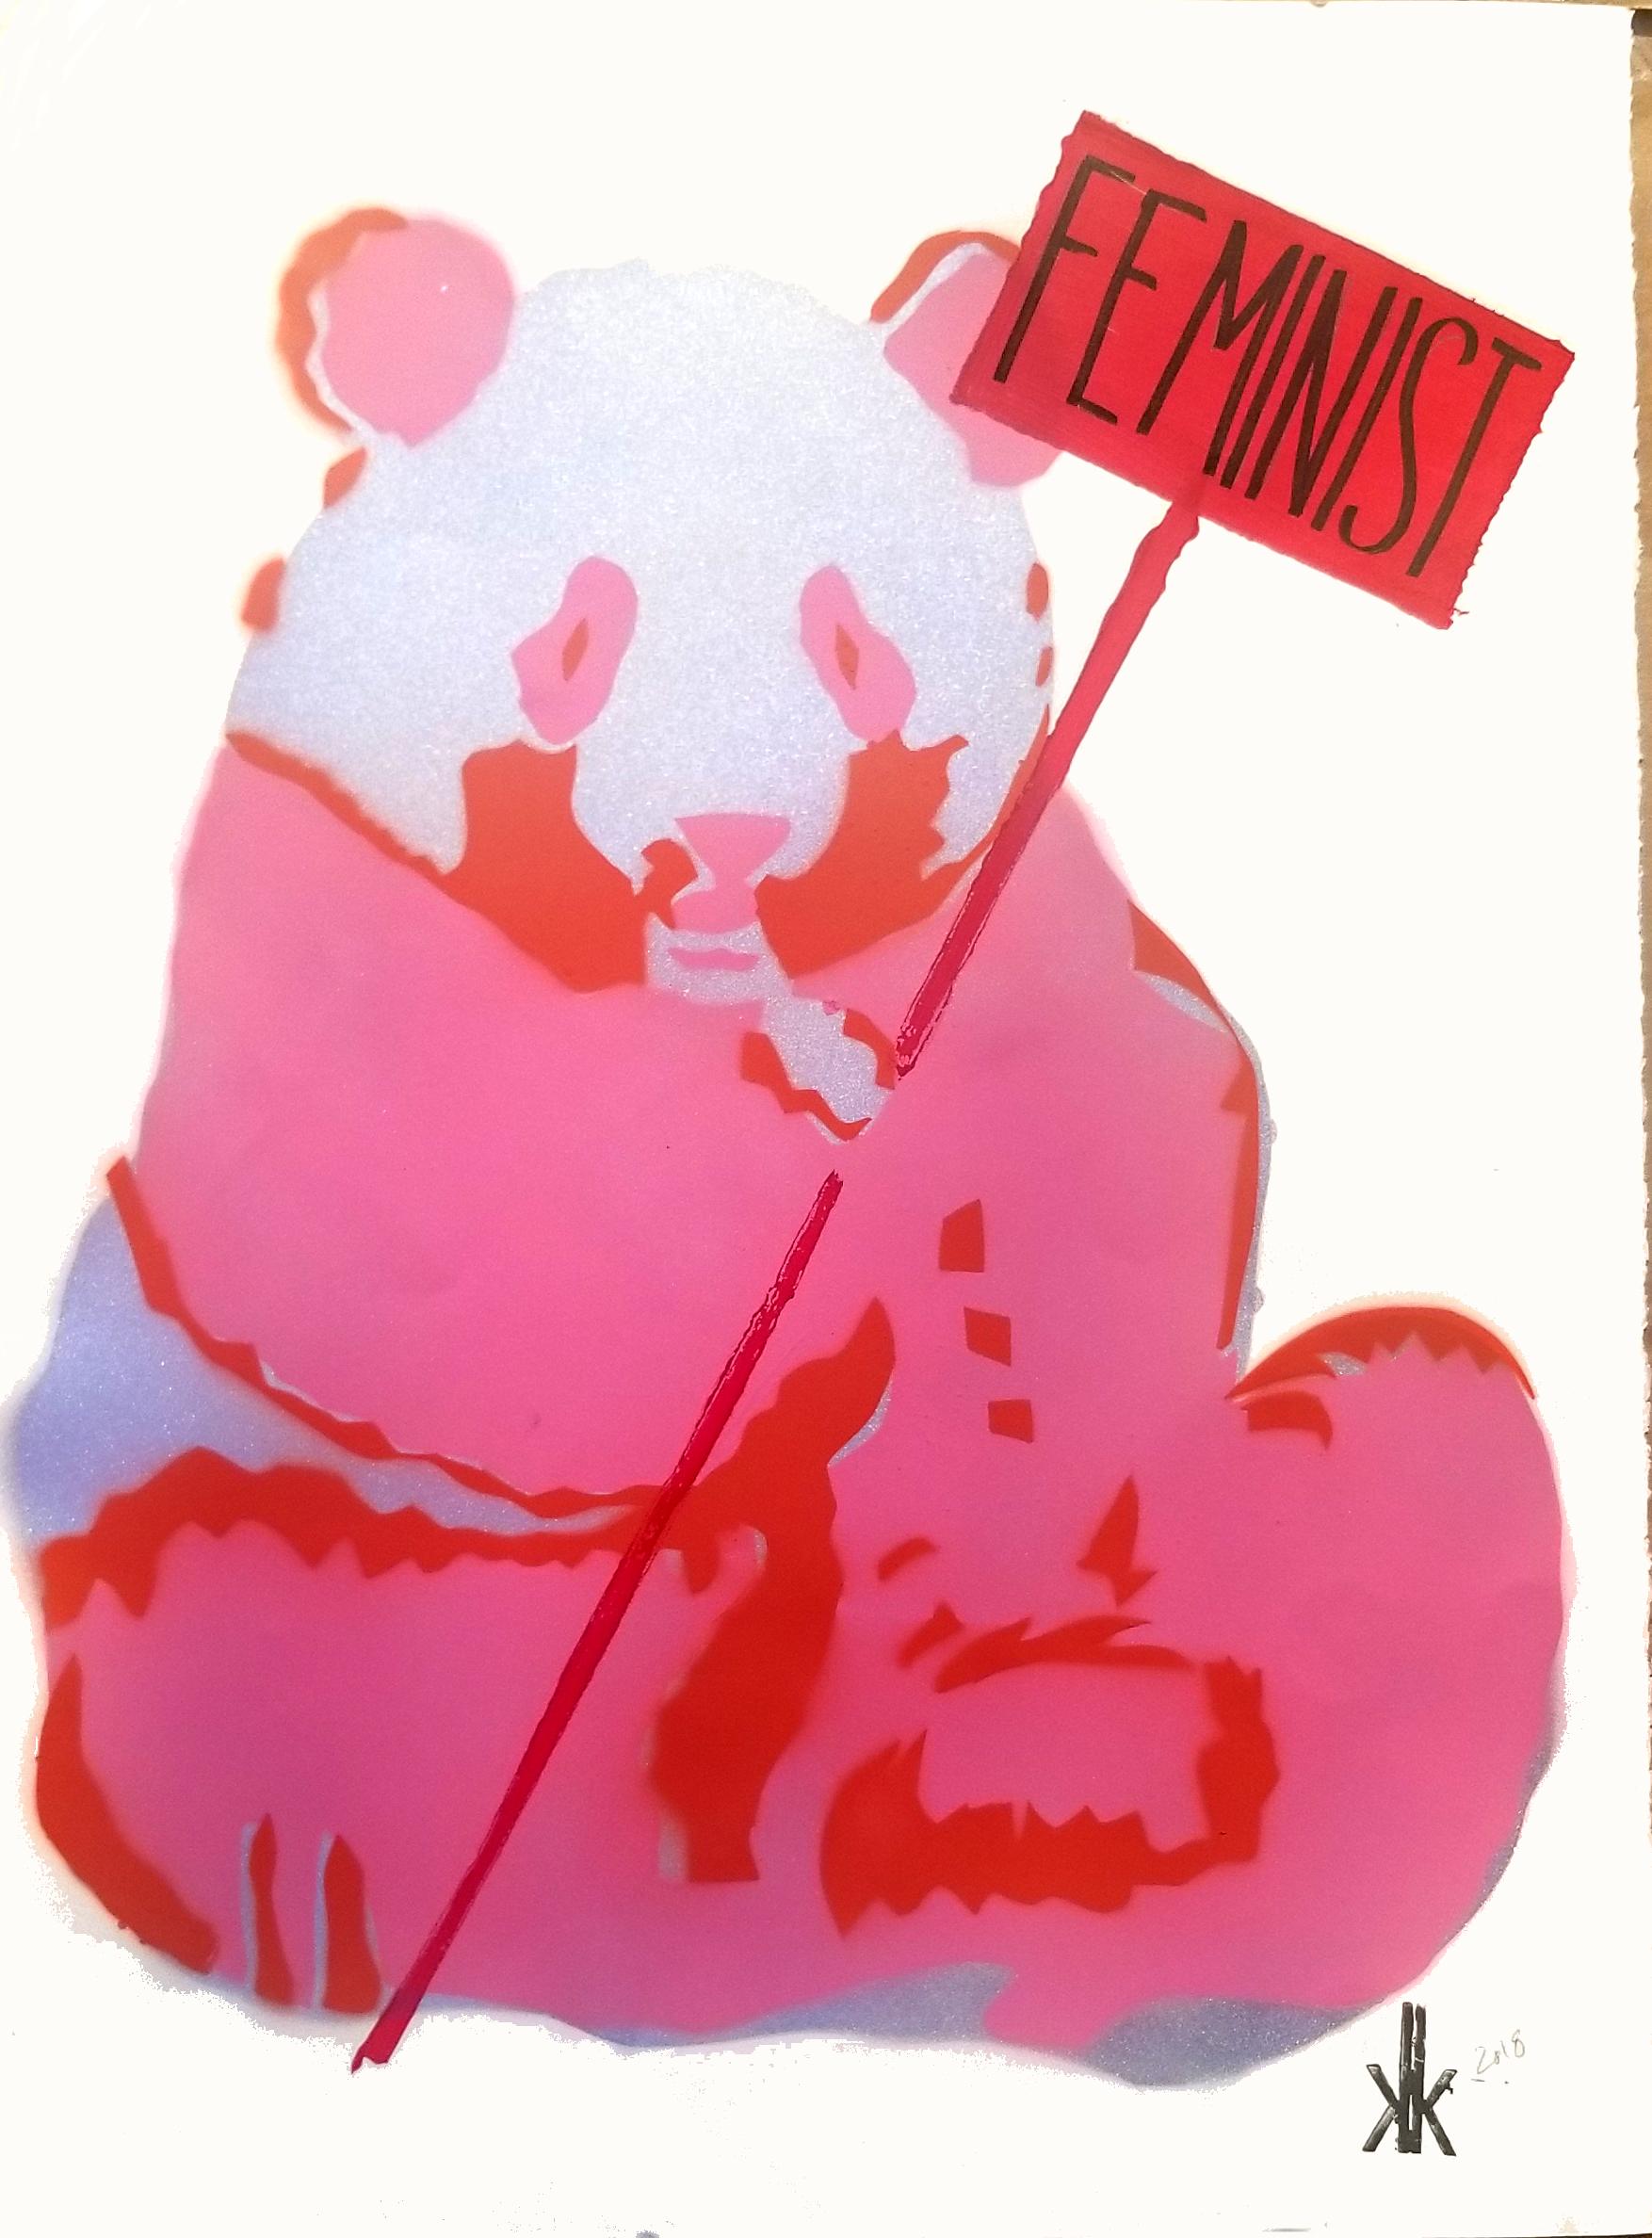 5 layer stencil painting
Panda Bear holding a LOVE ONE ANOTHER sign
Political statements in text
These are NOT prints. Original works on paper,

Comes rolled in a tube
Unique pieces
This is on 90lb Paper color: Natural

New York Artist; K.K.